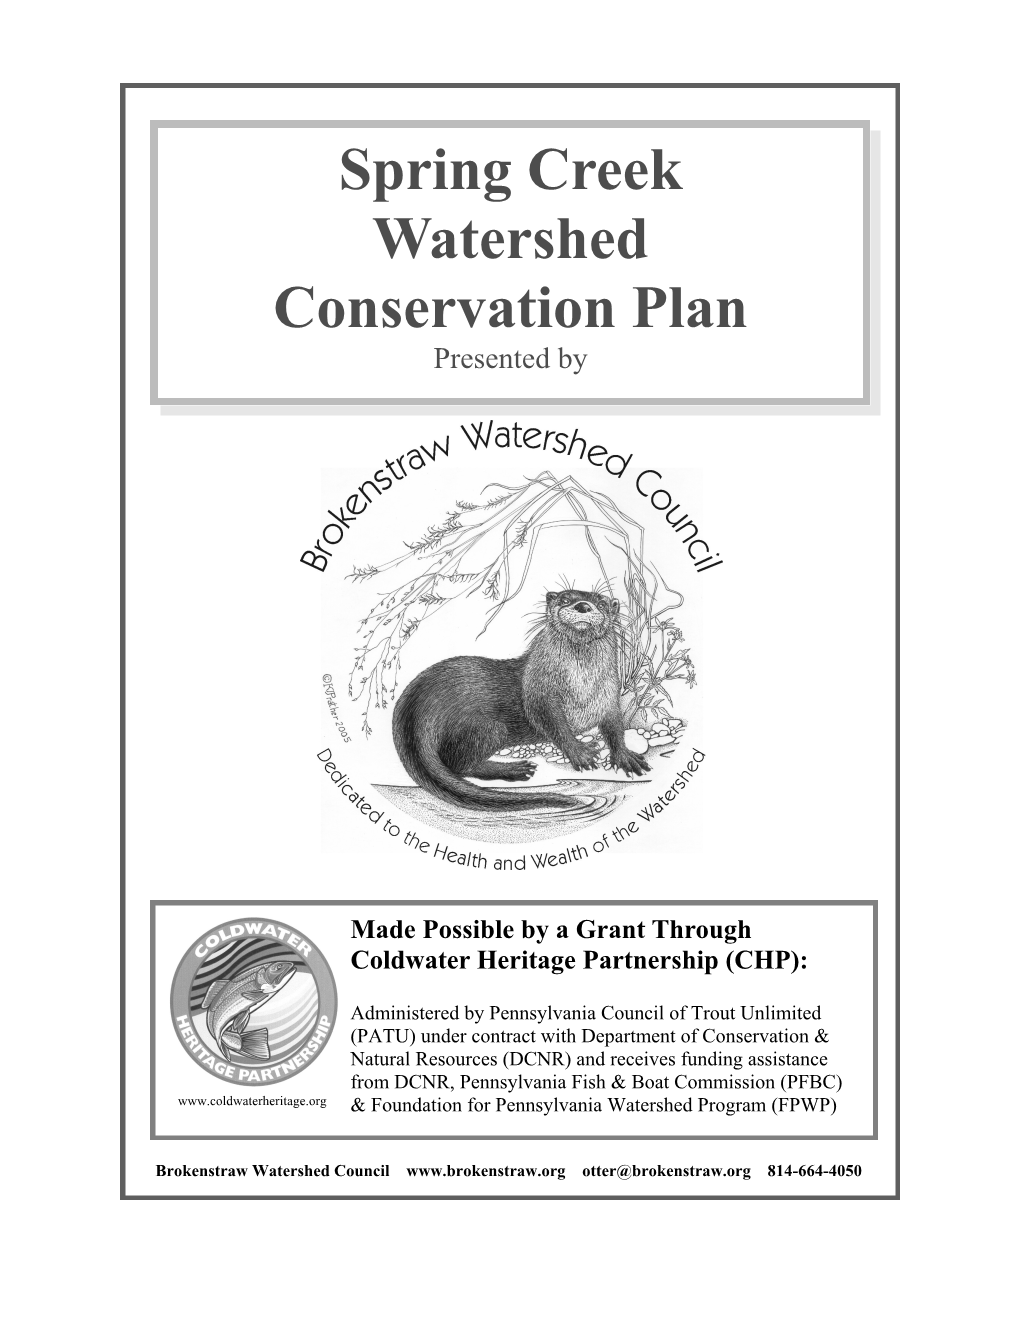 Spring Creek Watershed Conservation Plan Presented By